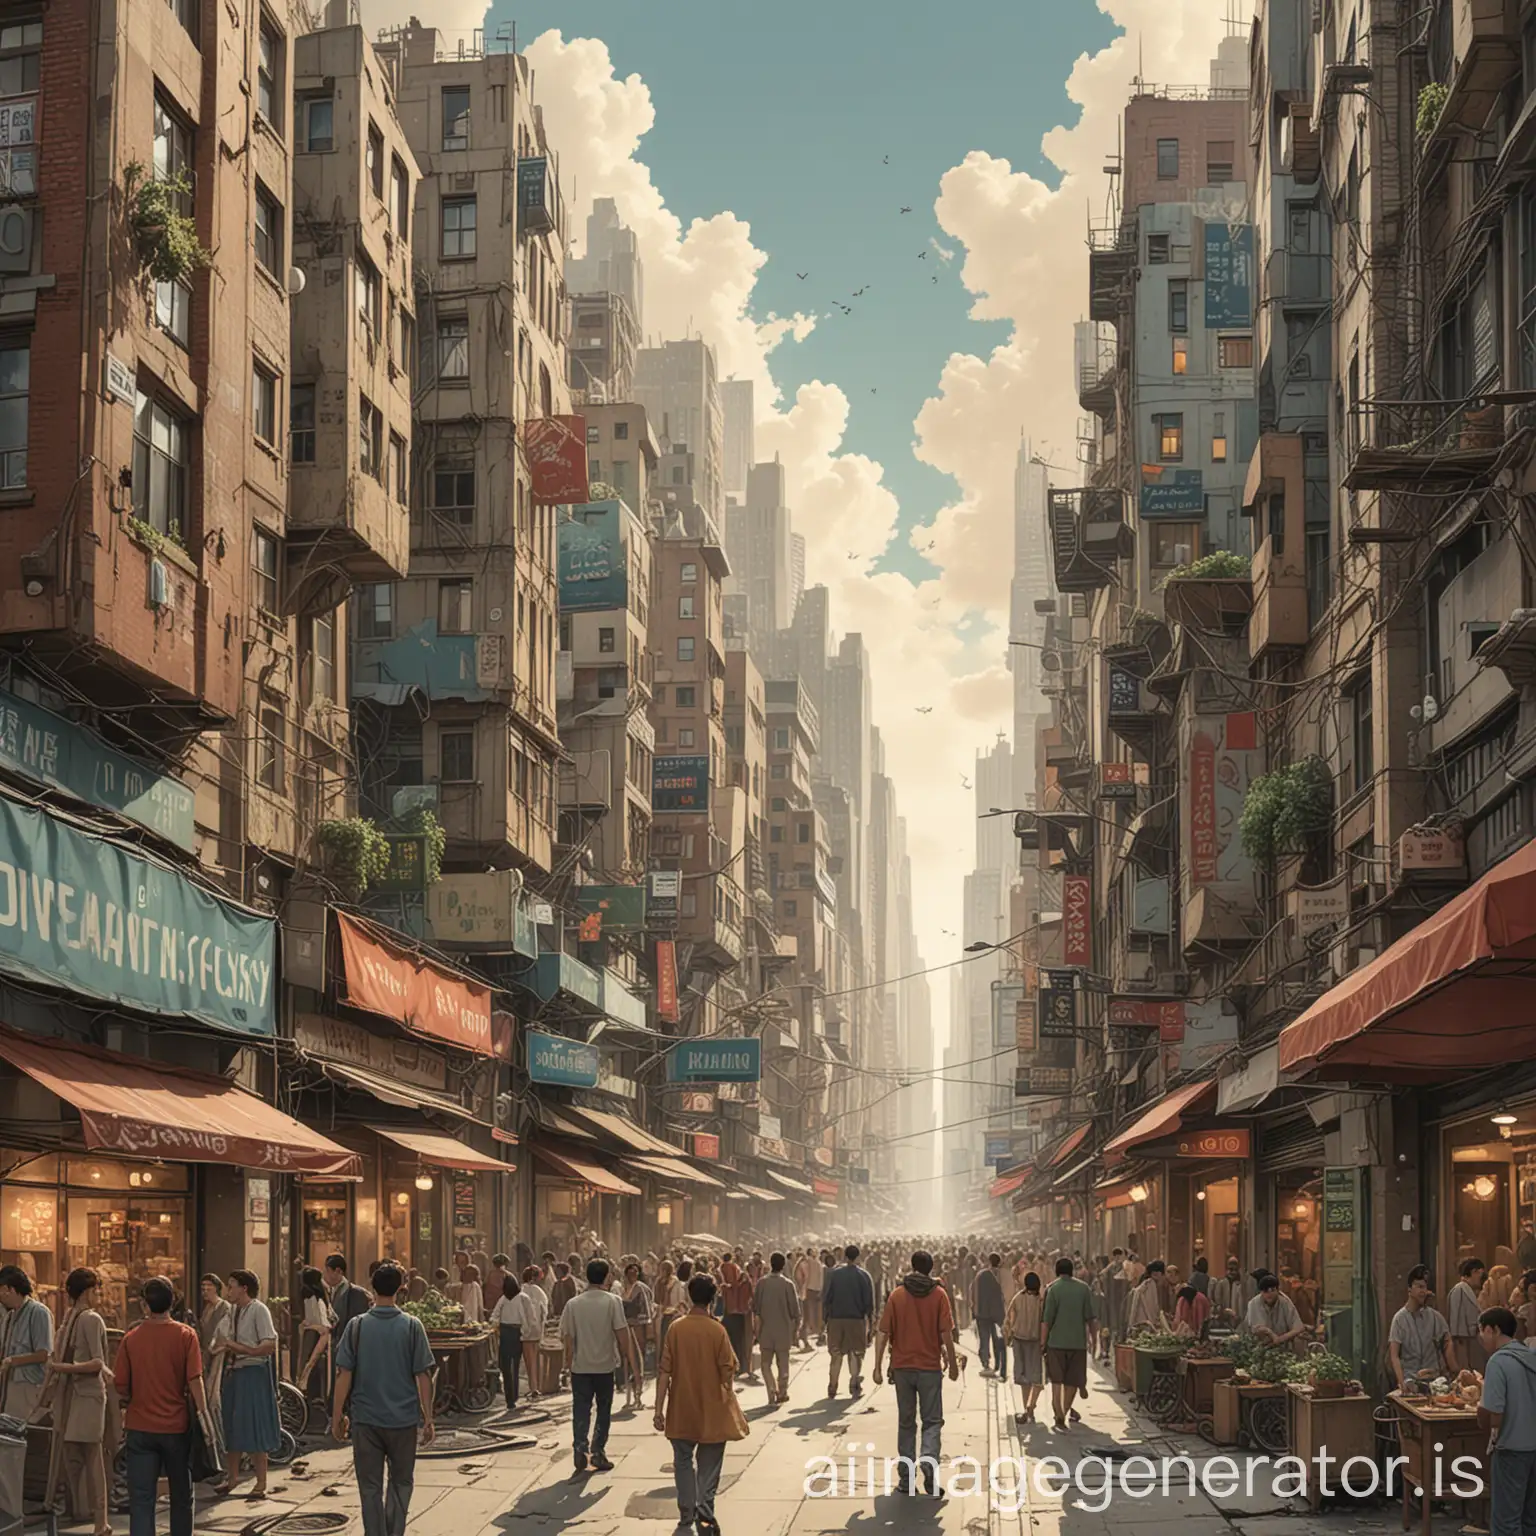 Panel 1: A bustling cityscape, with buildings stretching towards the sky. People are going about their daily lives.